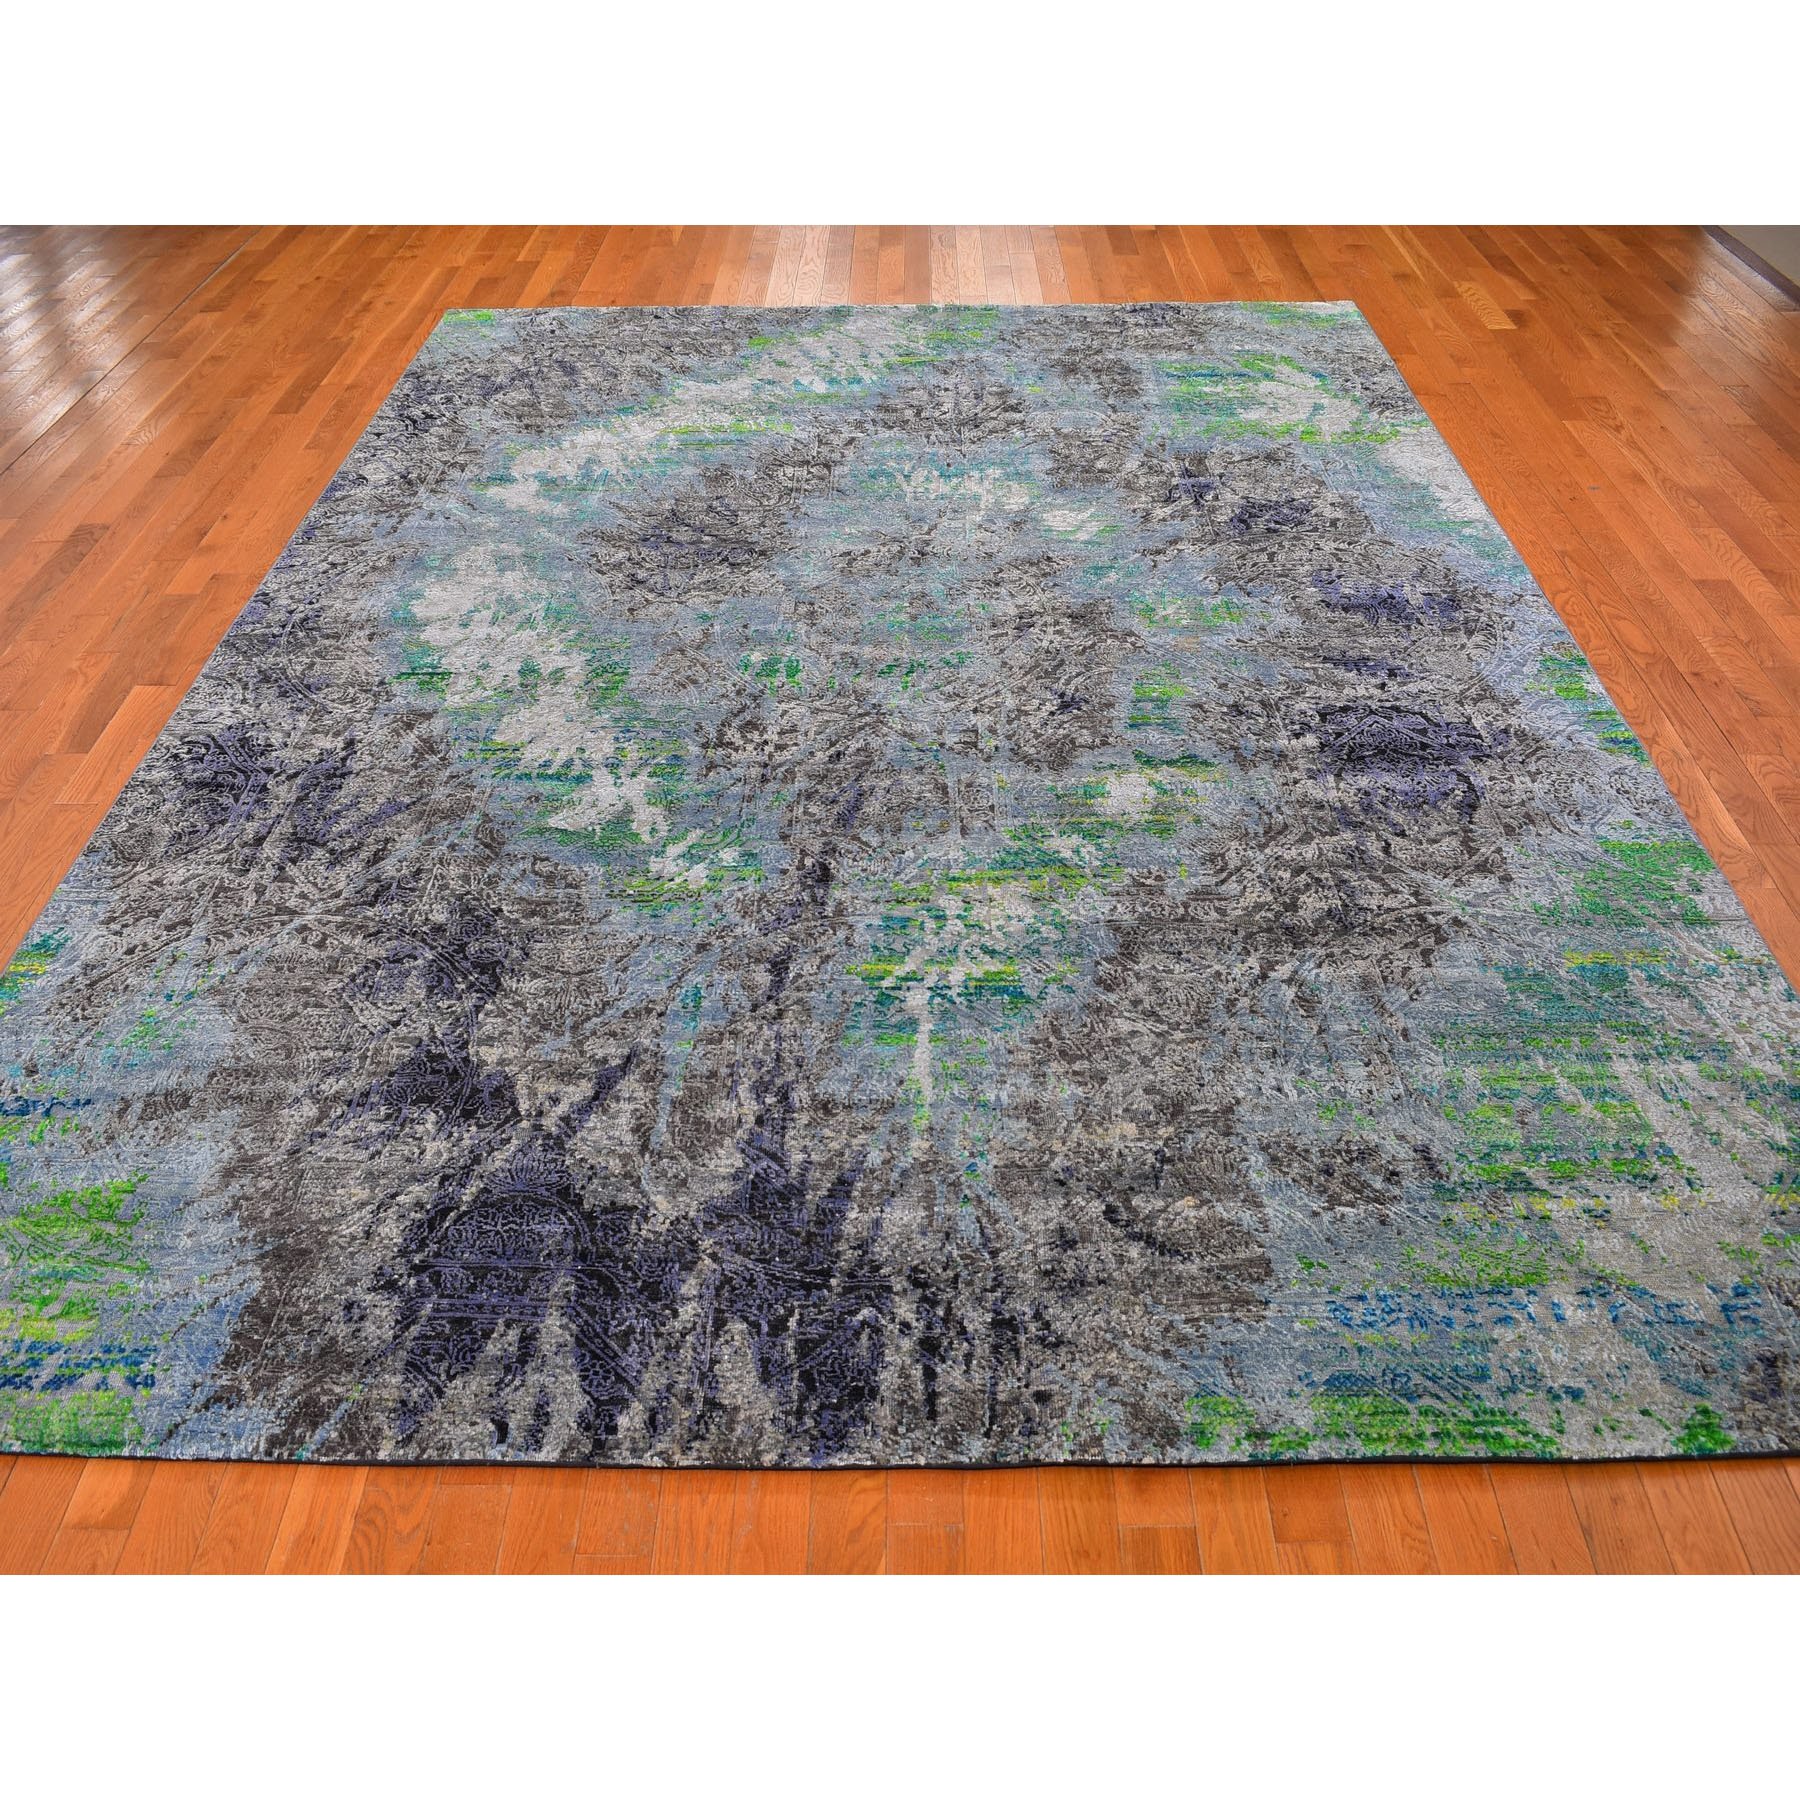 8-10 x12-5  COLORFUL DIMINISHING COINS, Sari Silk with Textured Wool Hand-Knotted Rug 